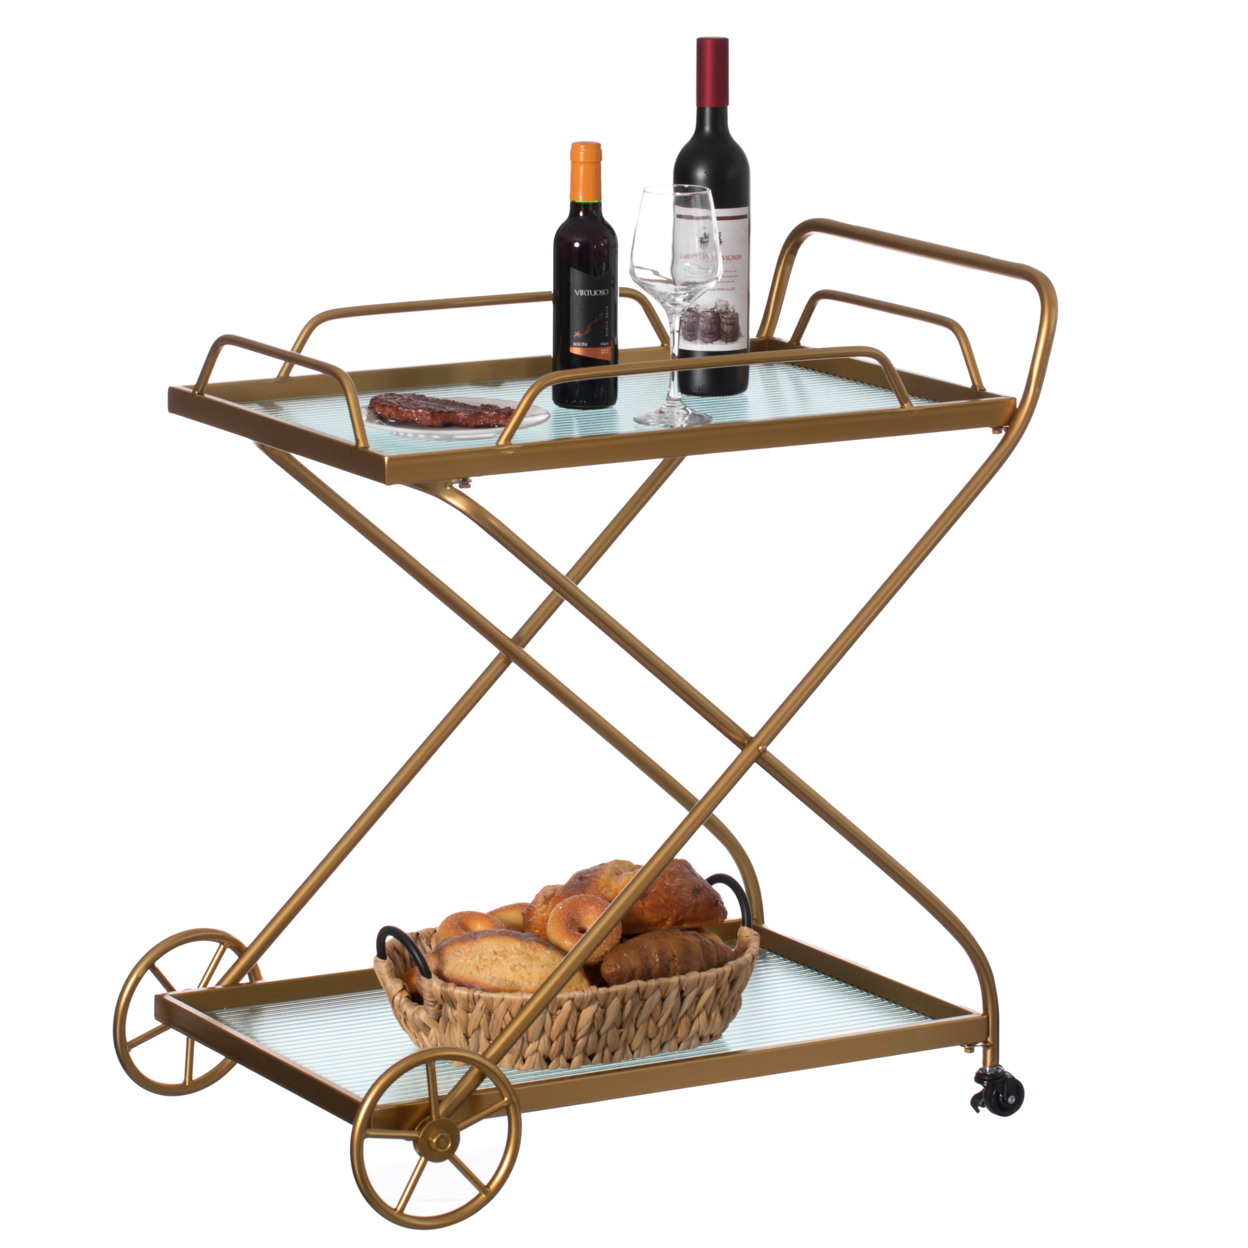 Gold Metal Wine Bar Serving Cart With Rolling Wheels And Handles For Dining, Living Room Or Entryway